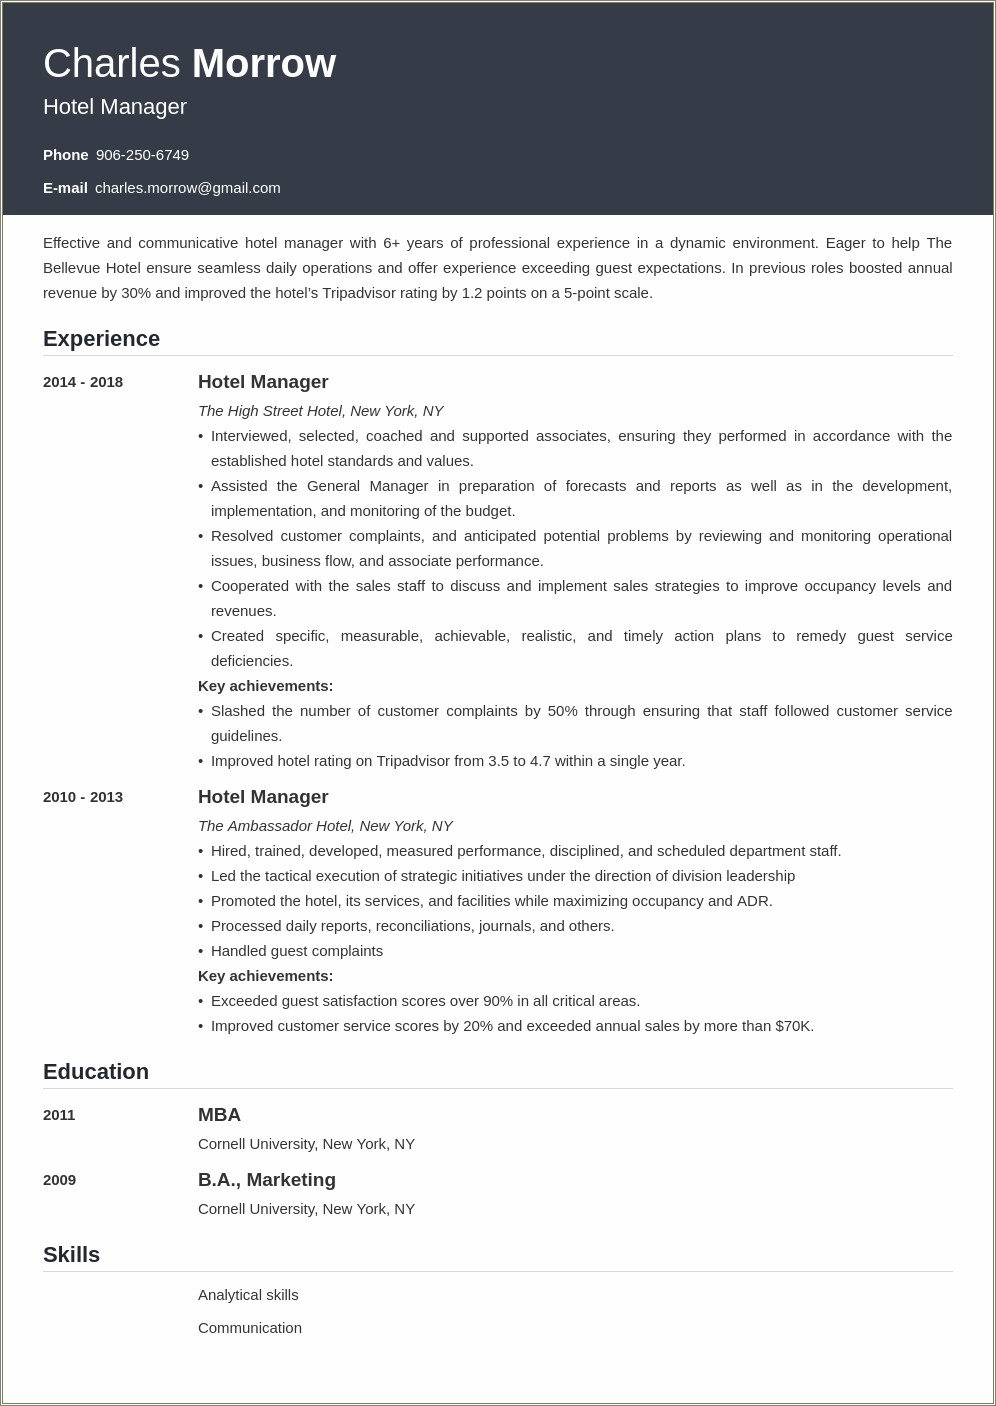 Resume Of Experienced Hotel Managers Examples